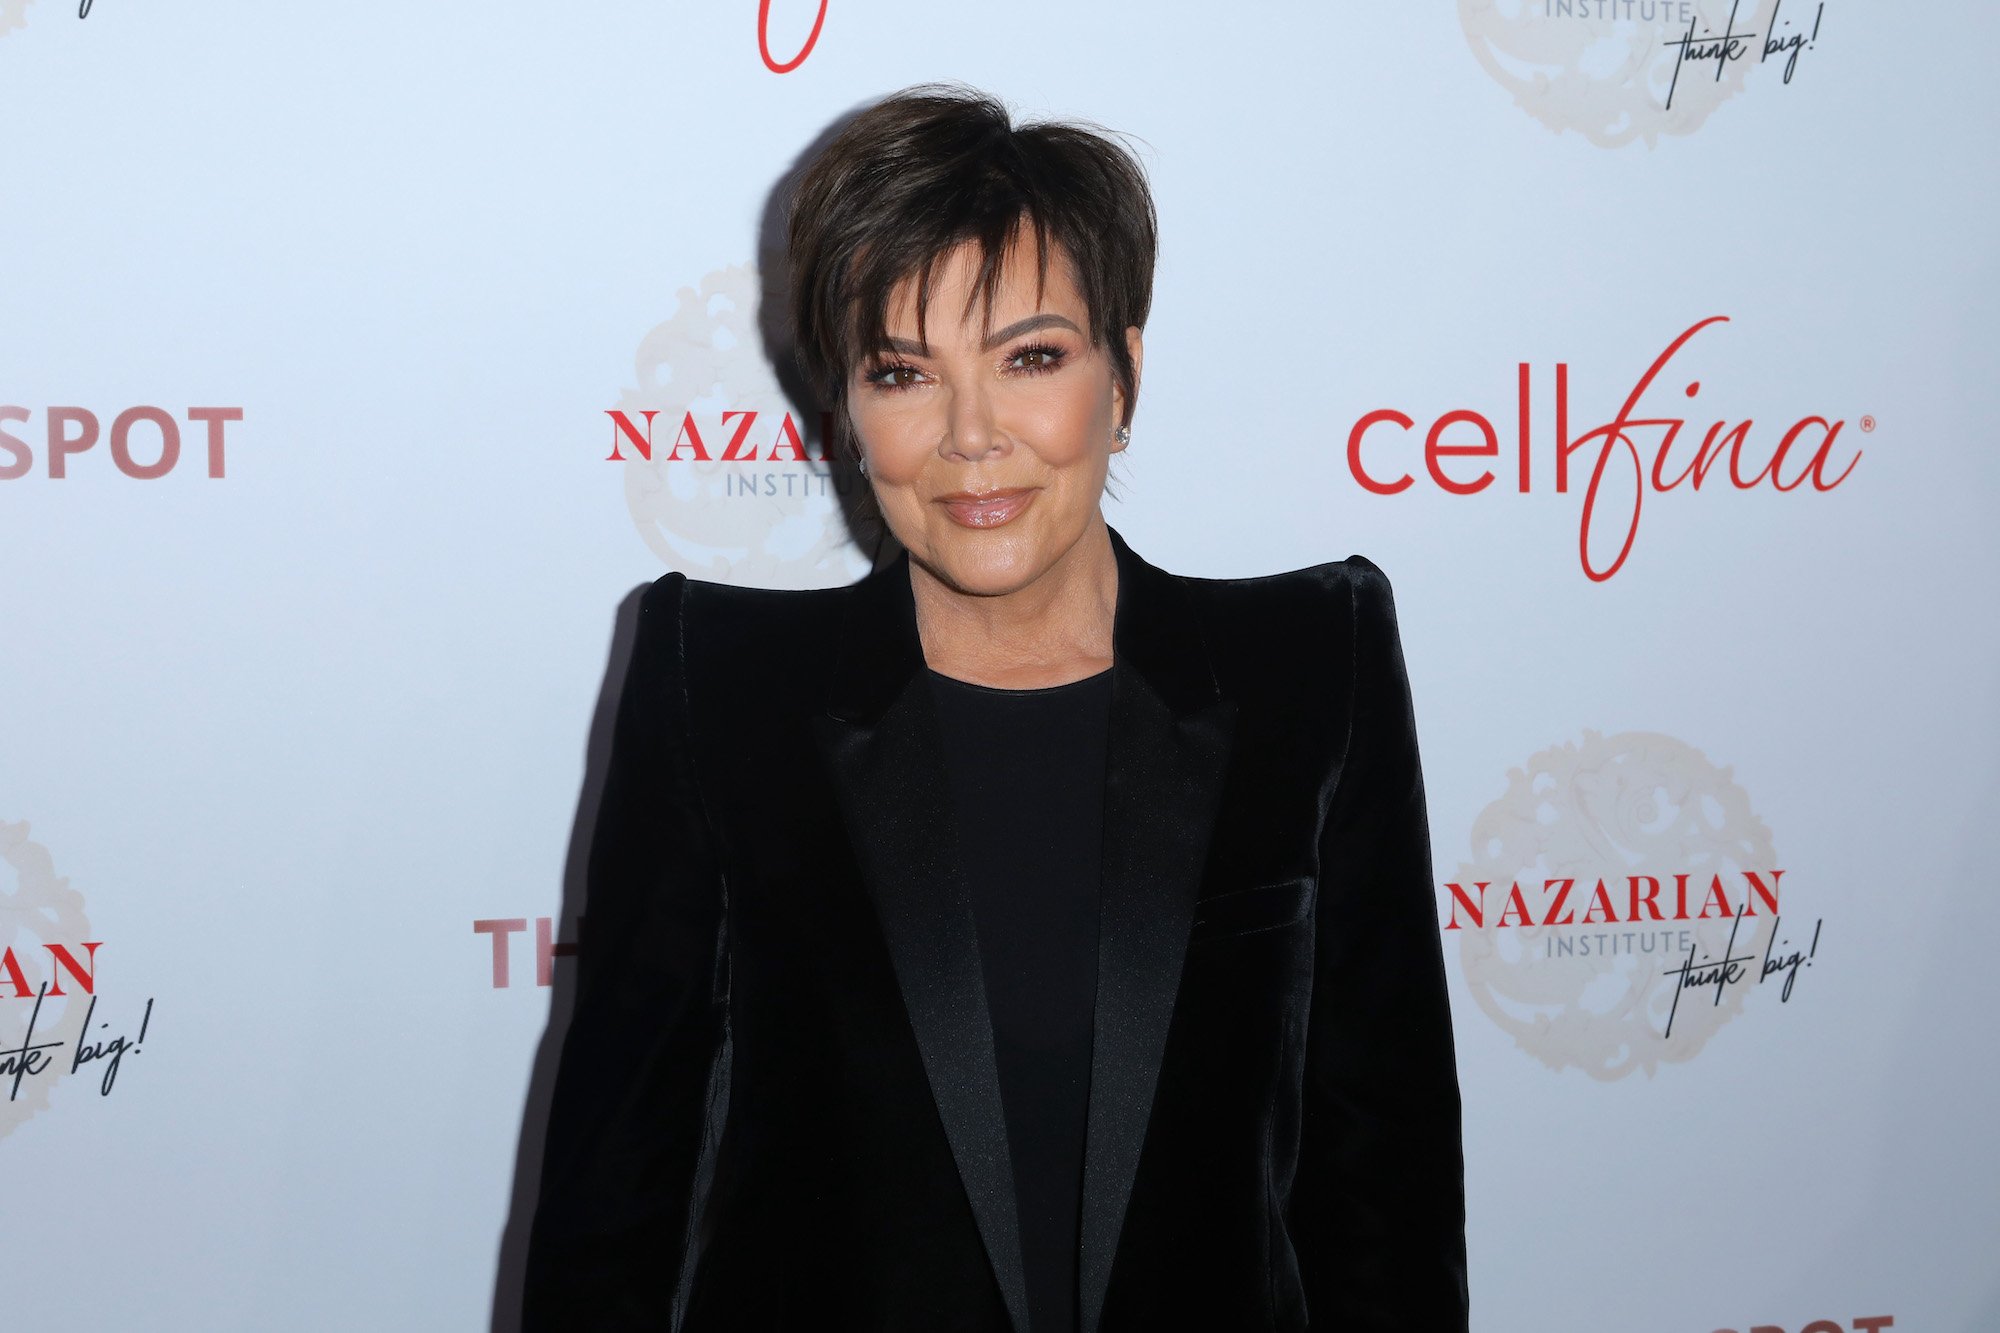 Kris Jenner smiles as she poses for cameras at the Nazarian Institute's ThinkBIG 2020 Conference